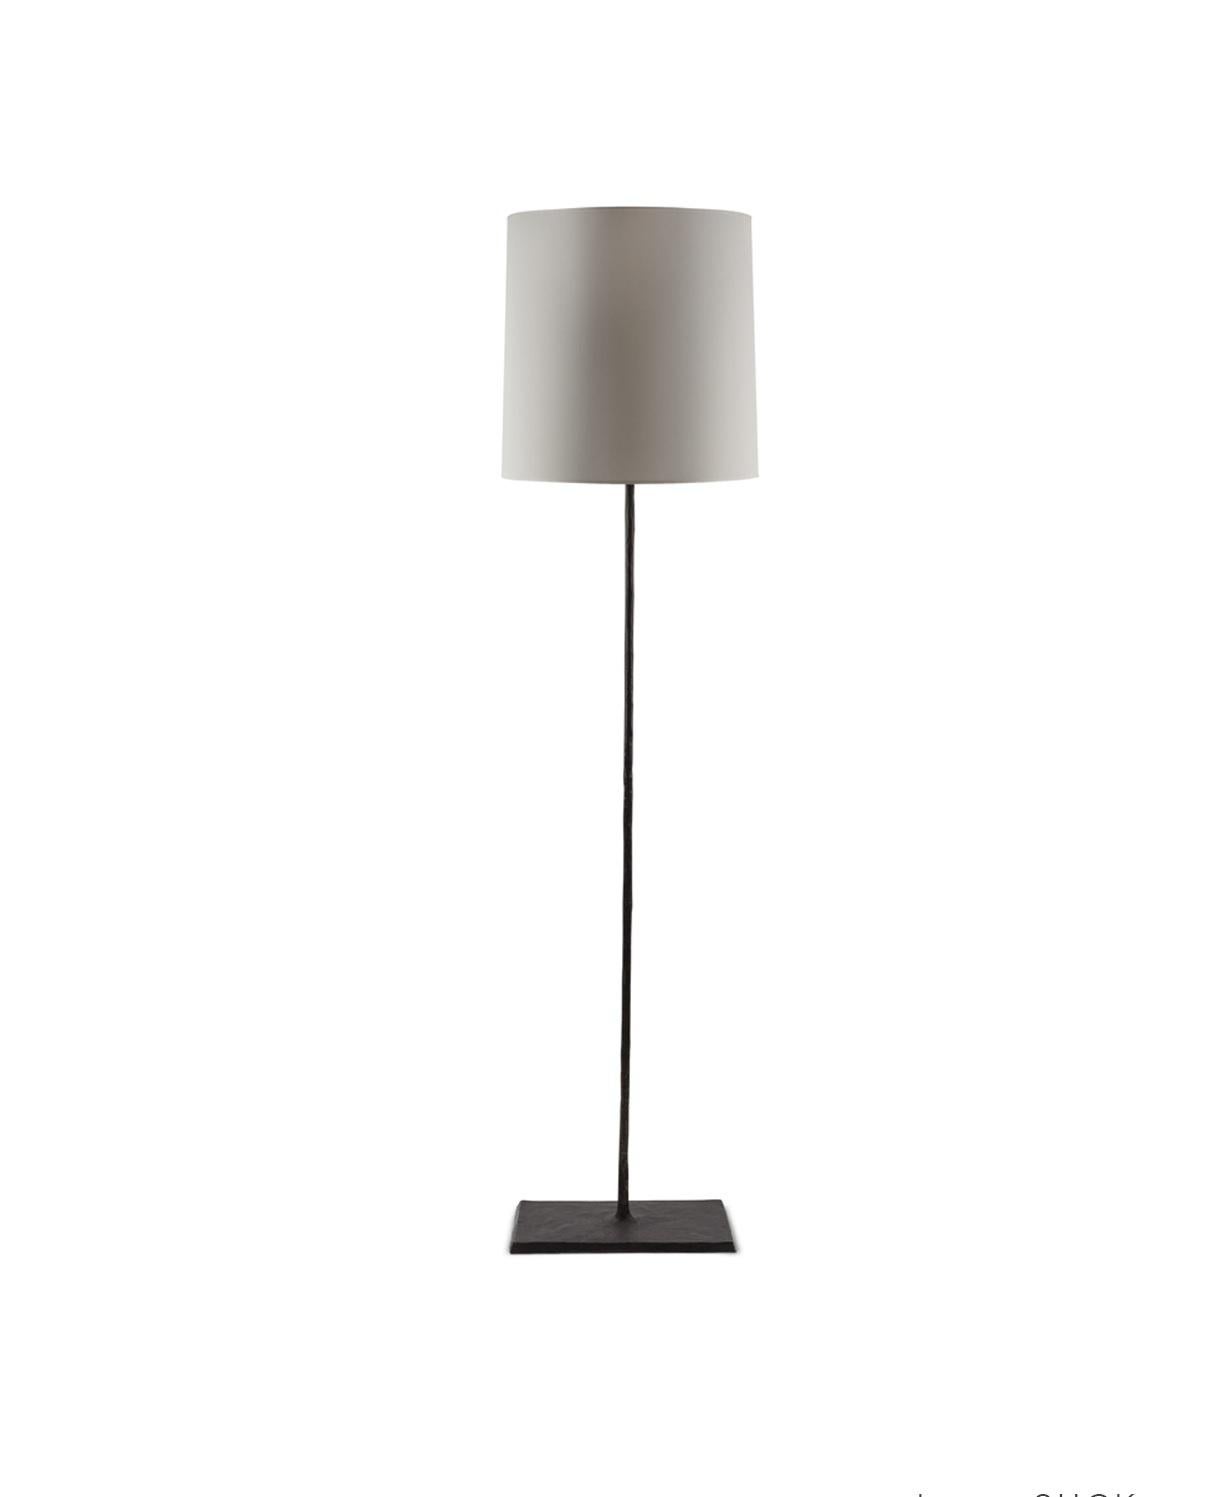 Suck floor lamp with paper shade by LK Edition
Dimensions: 17 x 15 x H 175 cm 
Materials: Black patinated bronze with paper shade. 
All our lamps can be wired according to each country. If sold to the USA it will be wired for the USA for